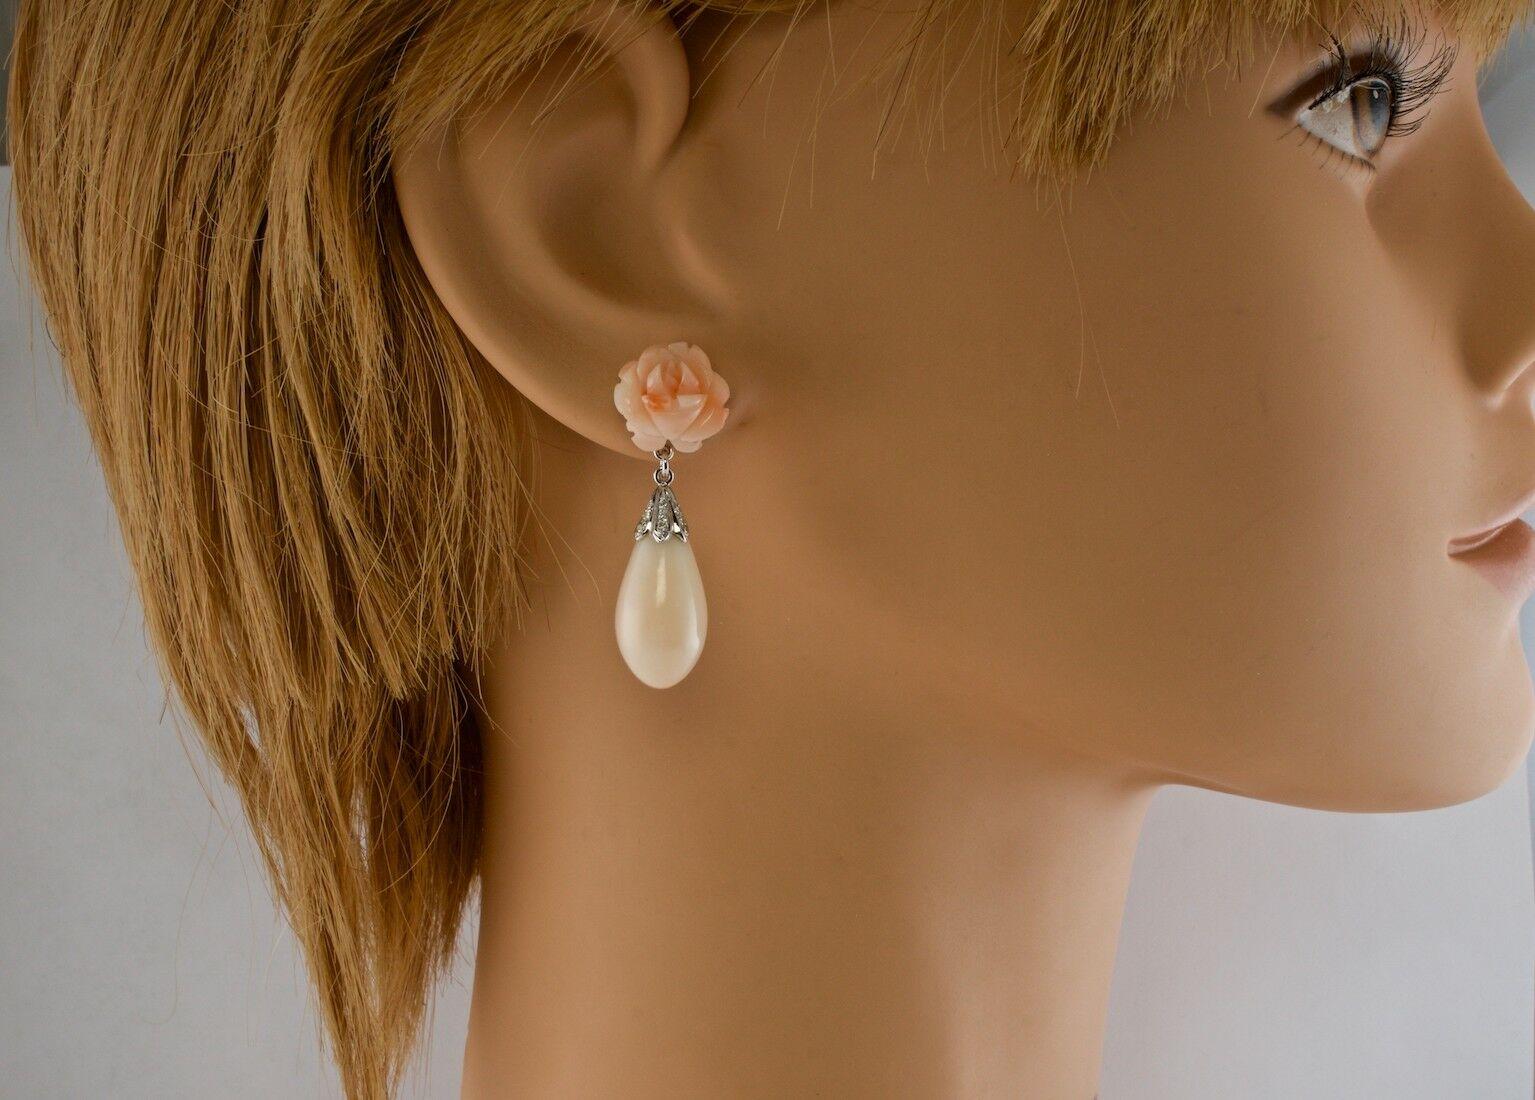 Cabochon Pink Coral Diamond Rose Flower Earrings 18K White Gold For Sale